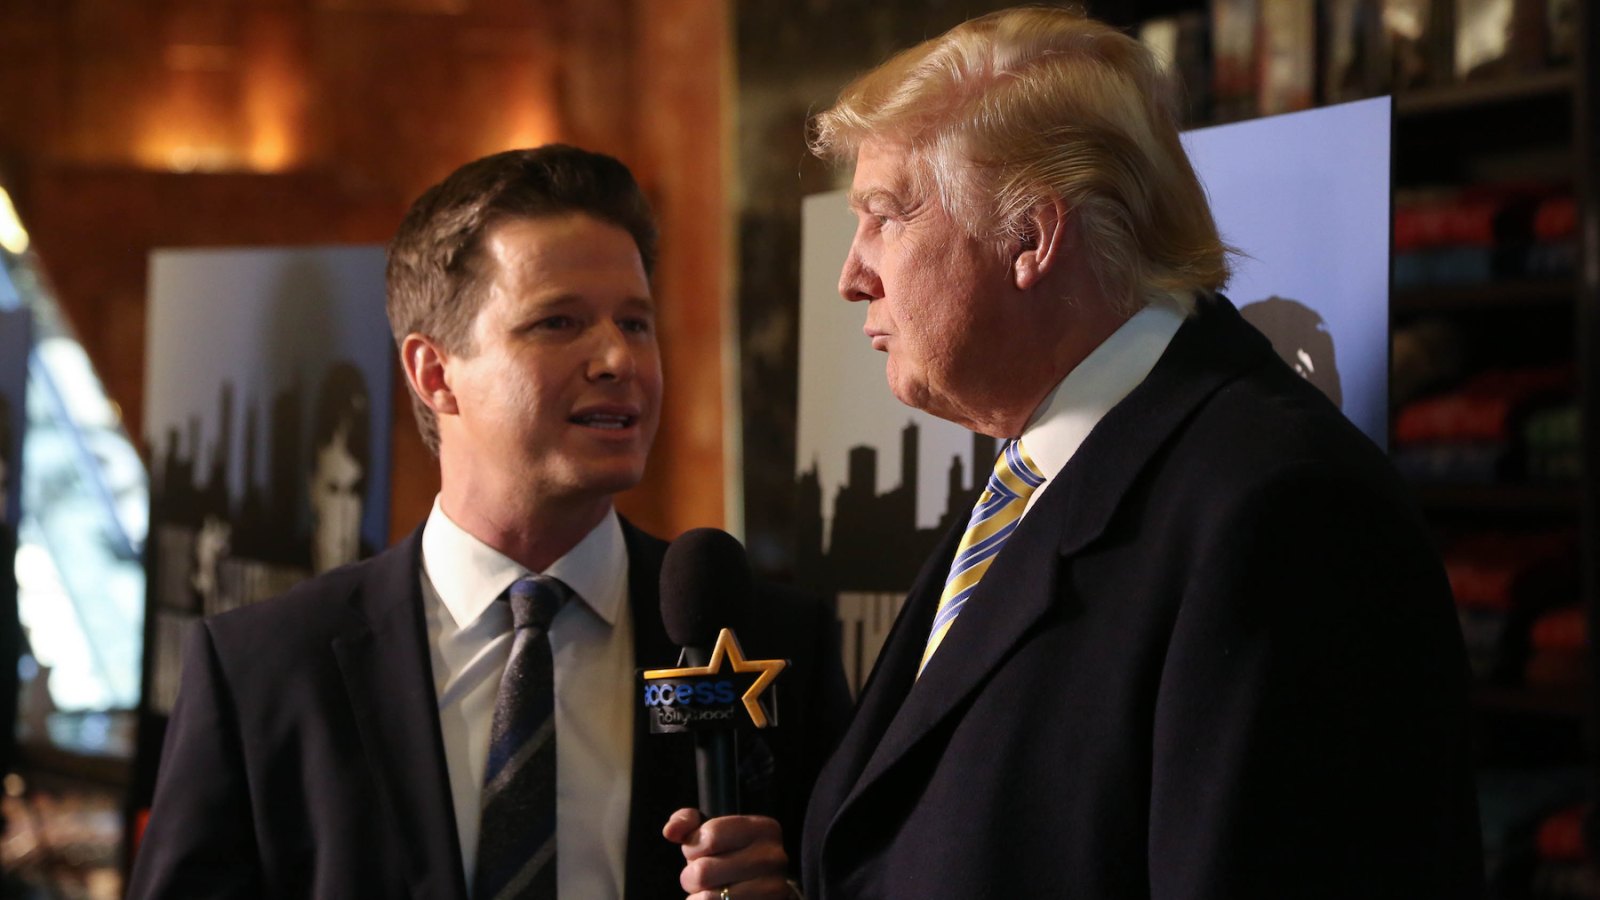 Billy Bush and Donald Trump